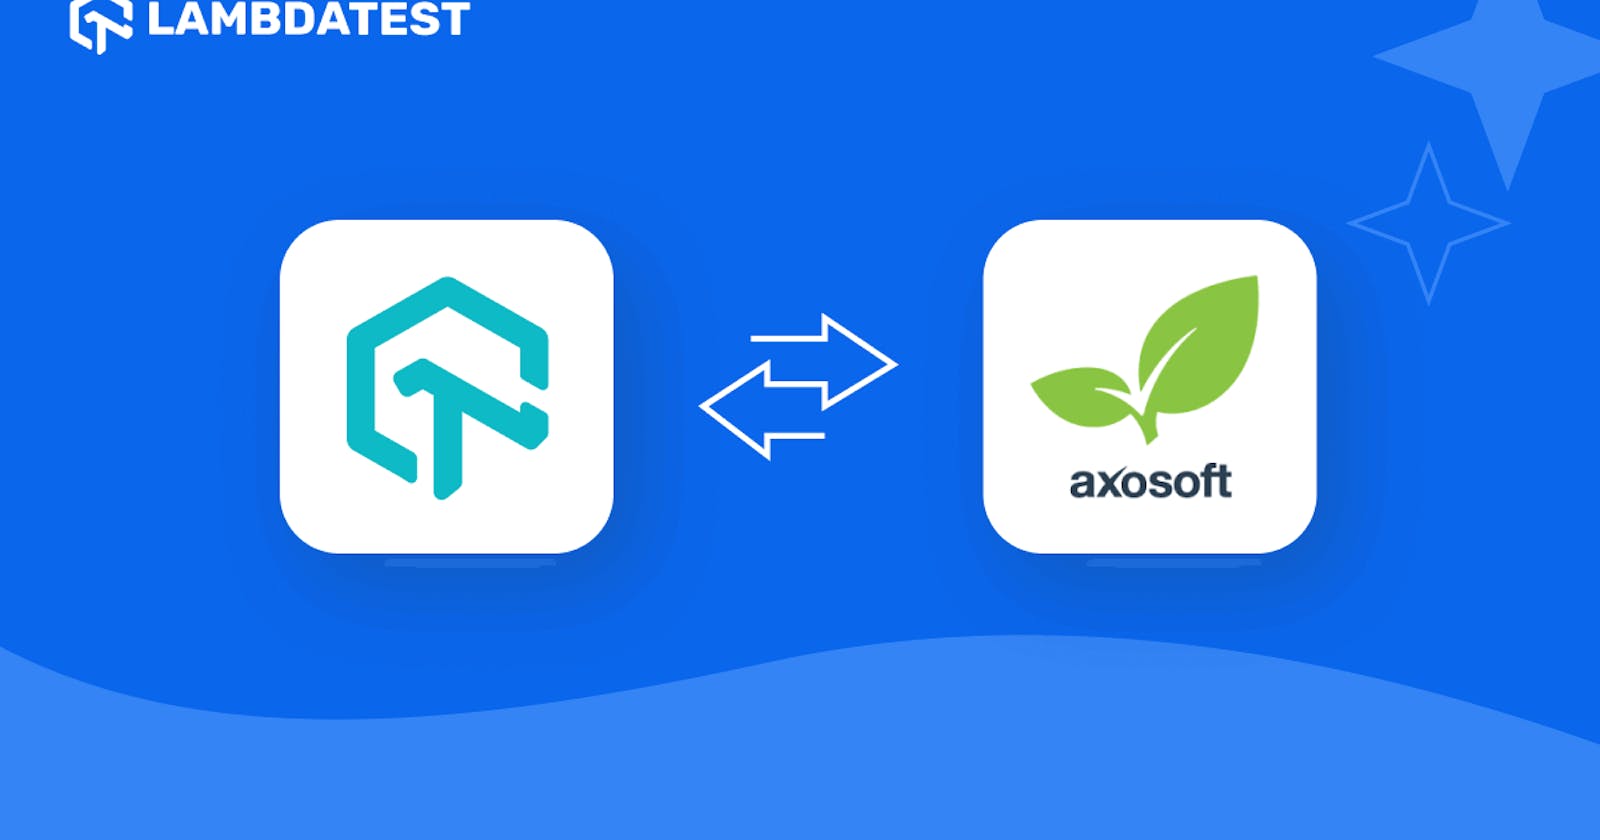 Track and Manage Bugs Effectively with LambdaTest and Axosoft